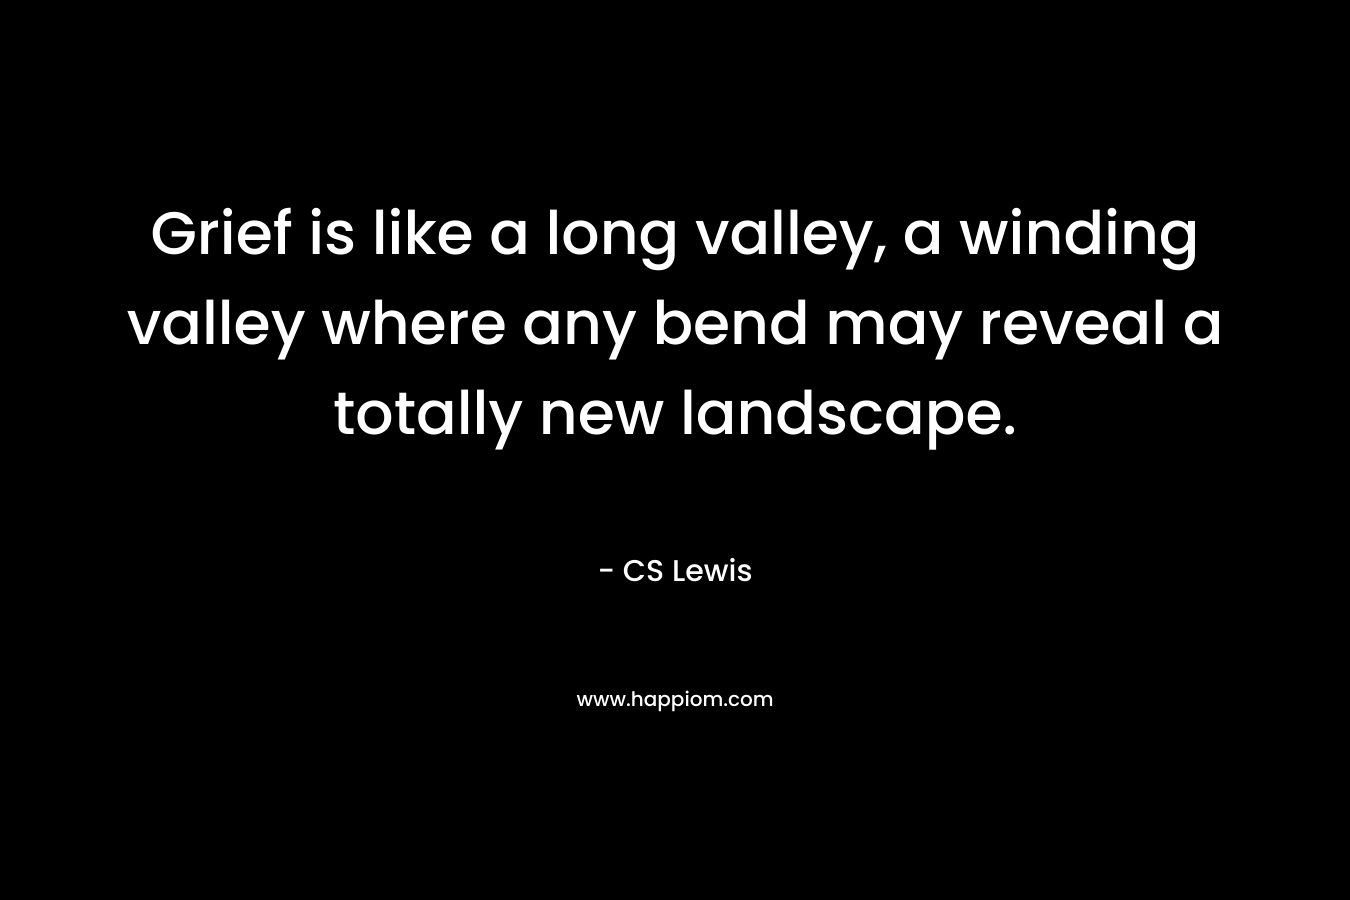 Grief is like a long valley, a winding valley where any bend may reveal a totally new landscape. – CS Lewis